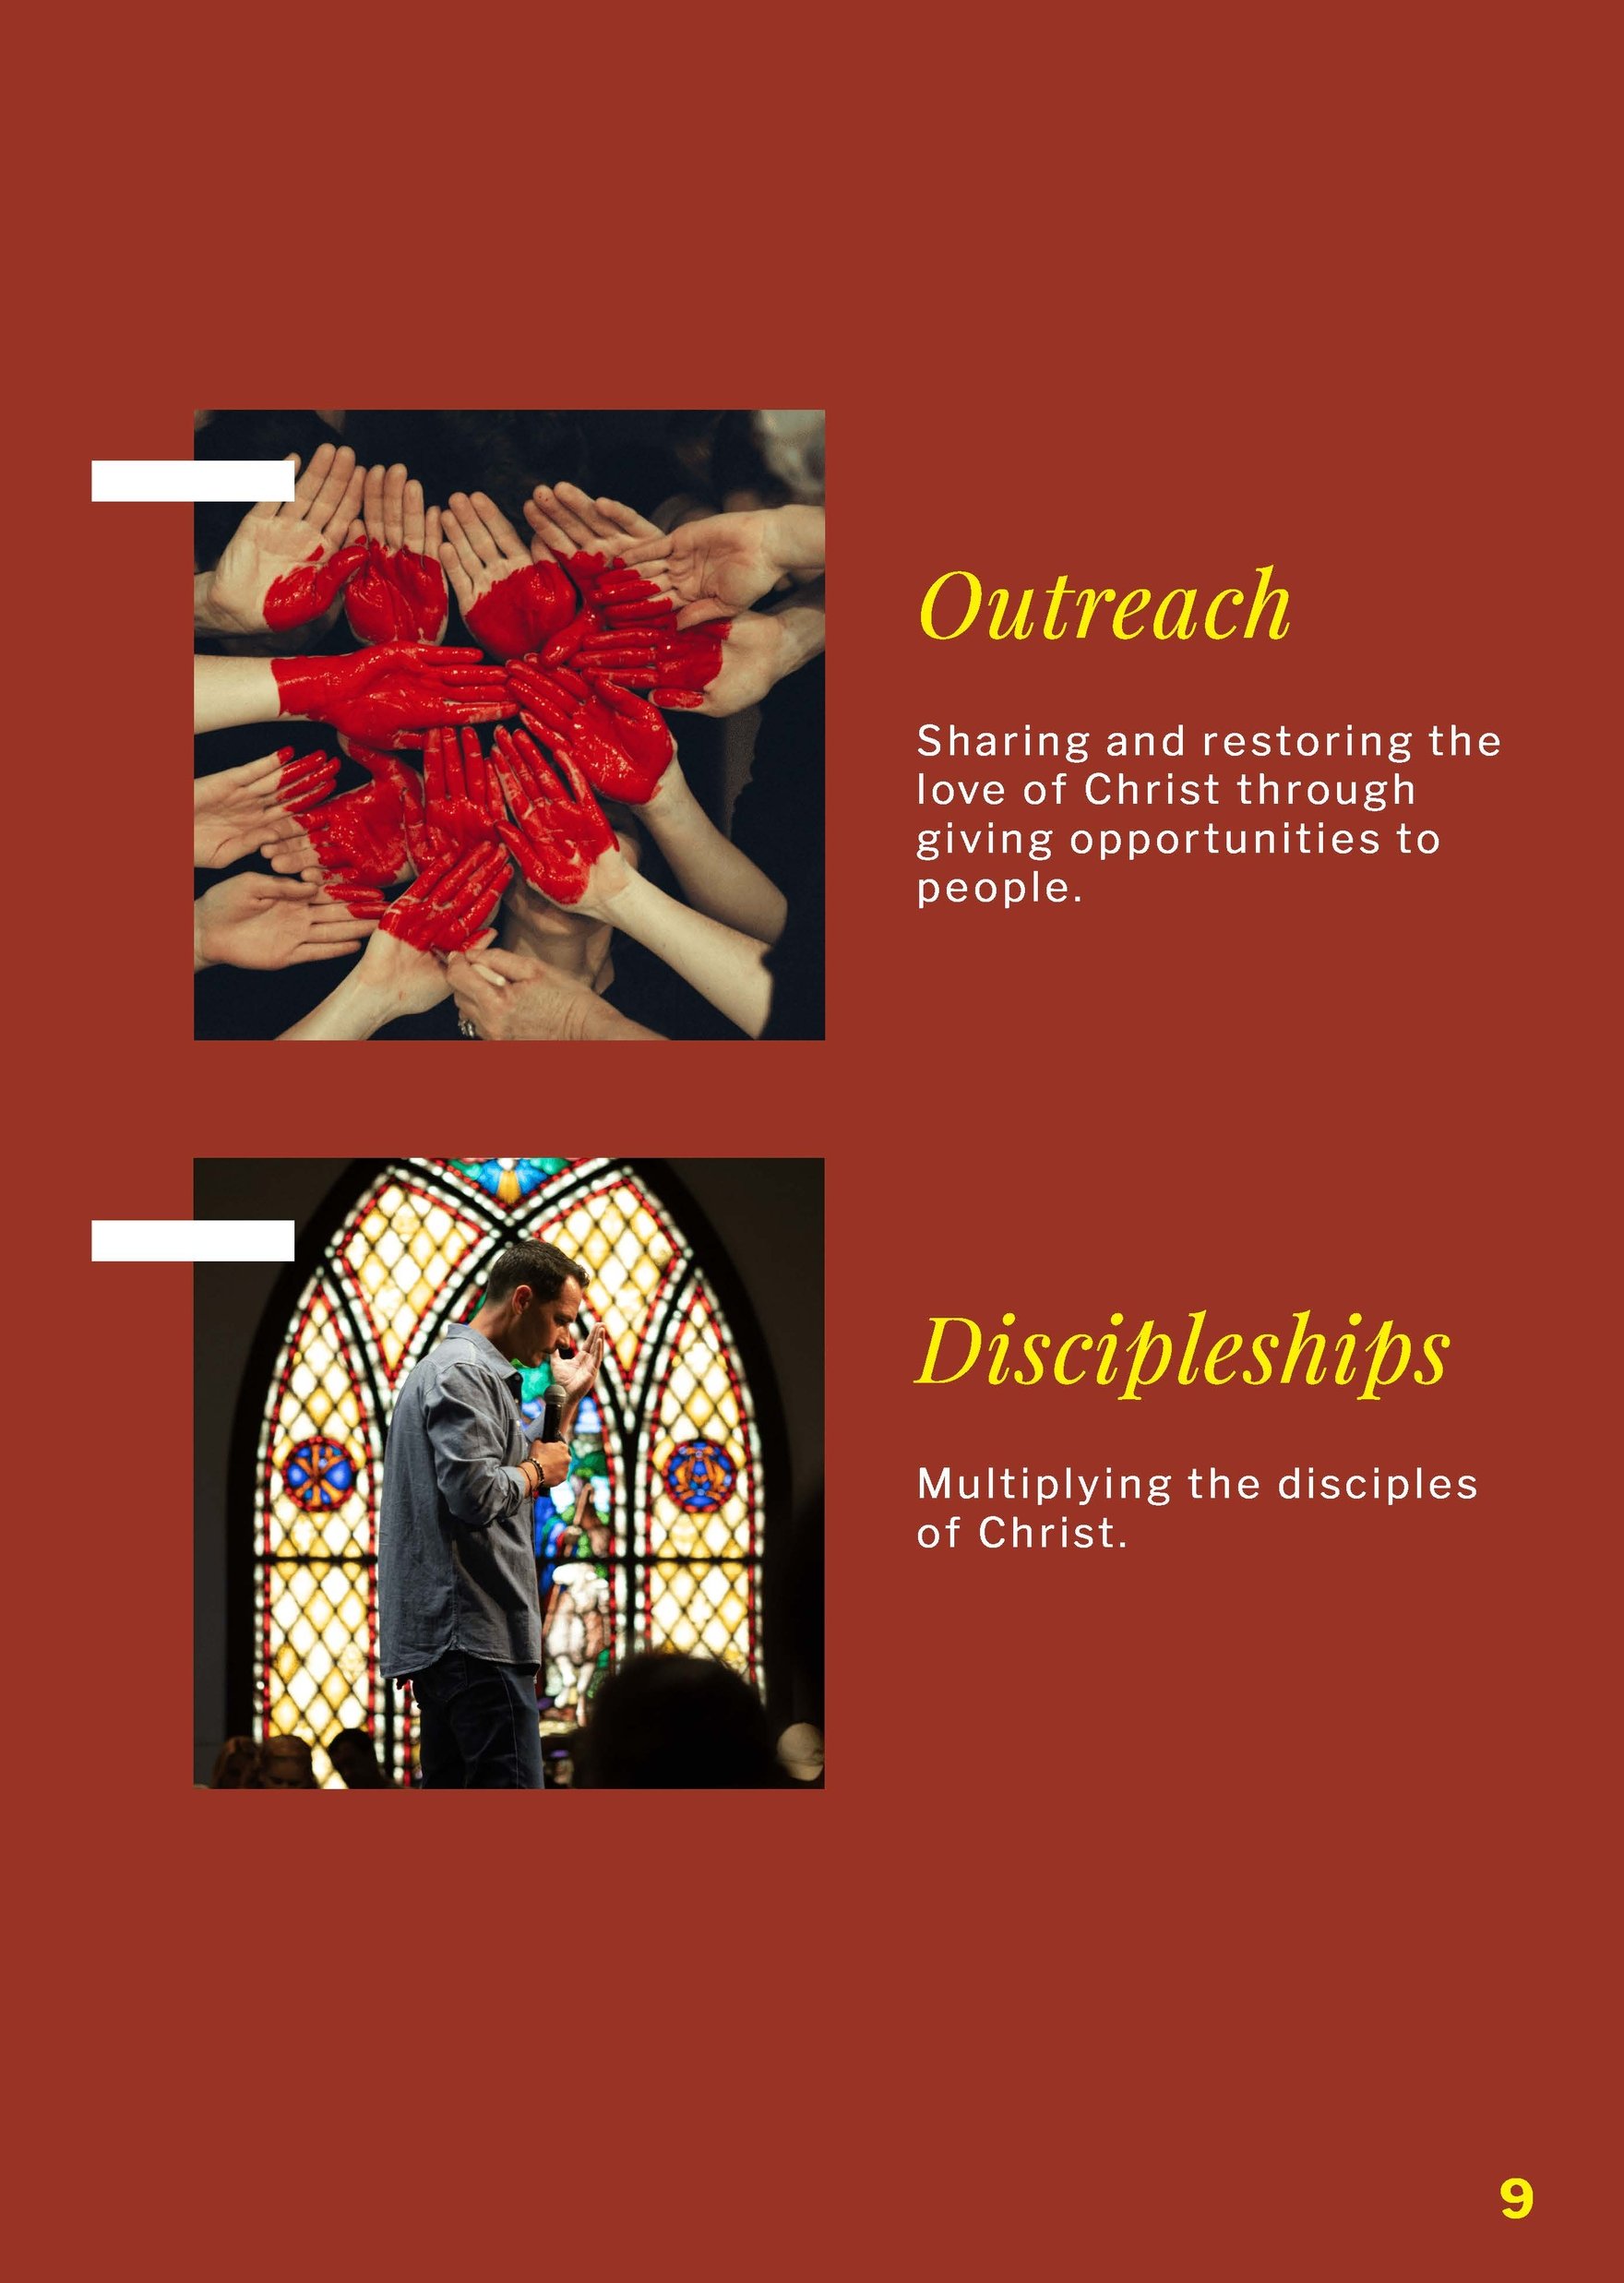 Church Booklet Template